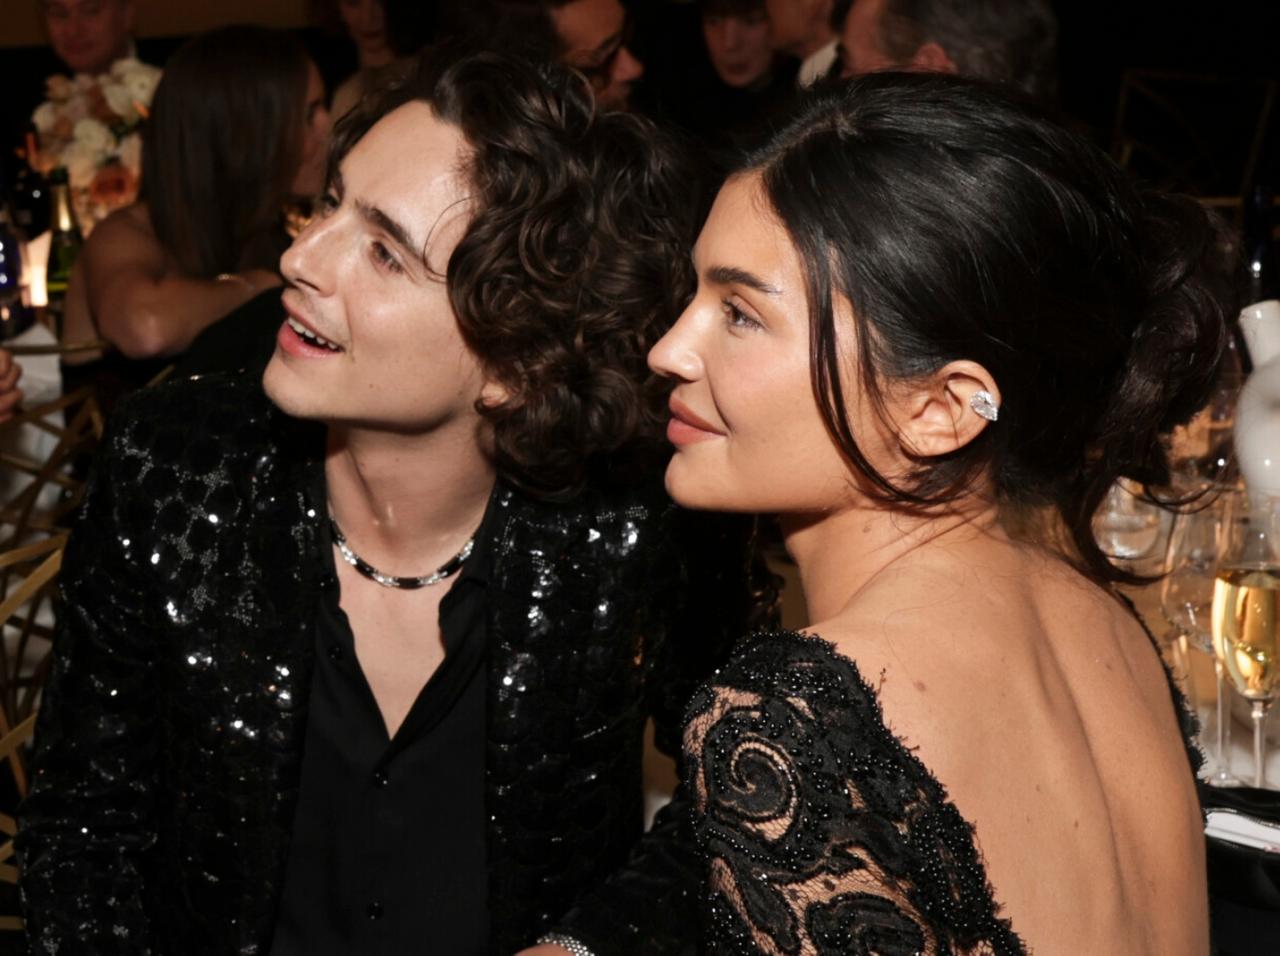 Kylie Jenner & Timothee Chalamet Are 'Serious' Despite What Haters Say